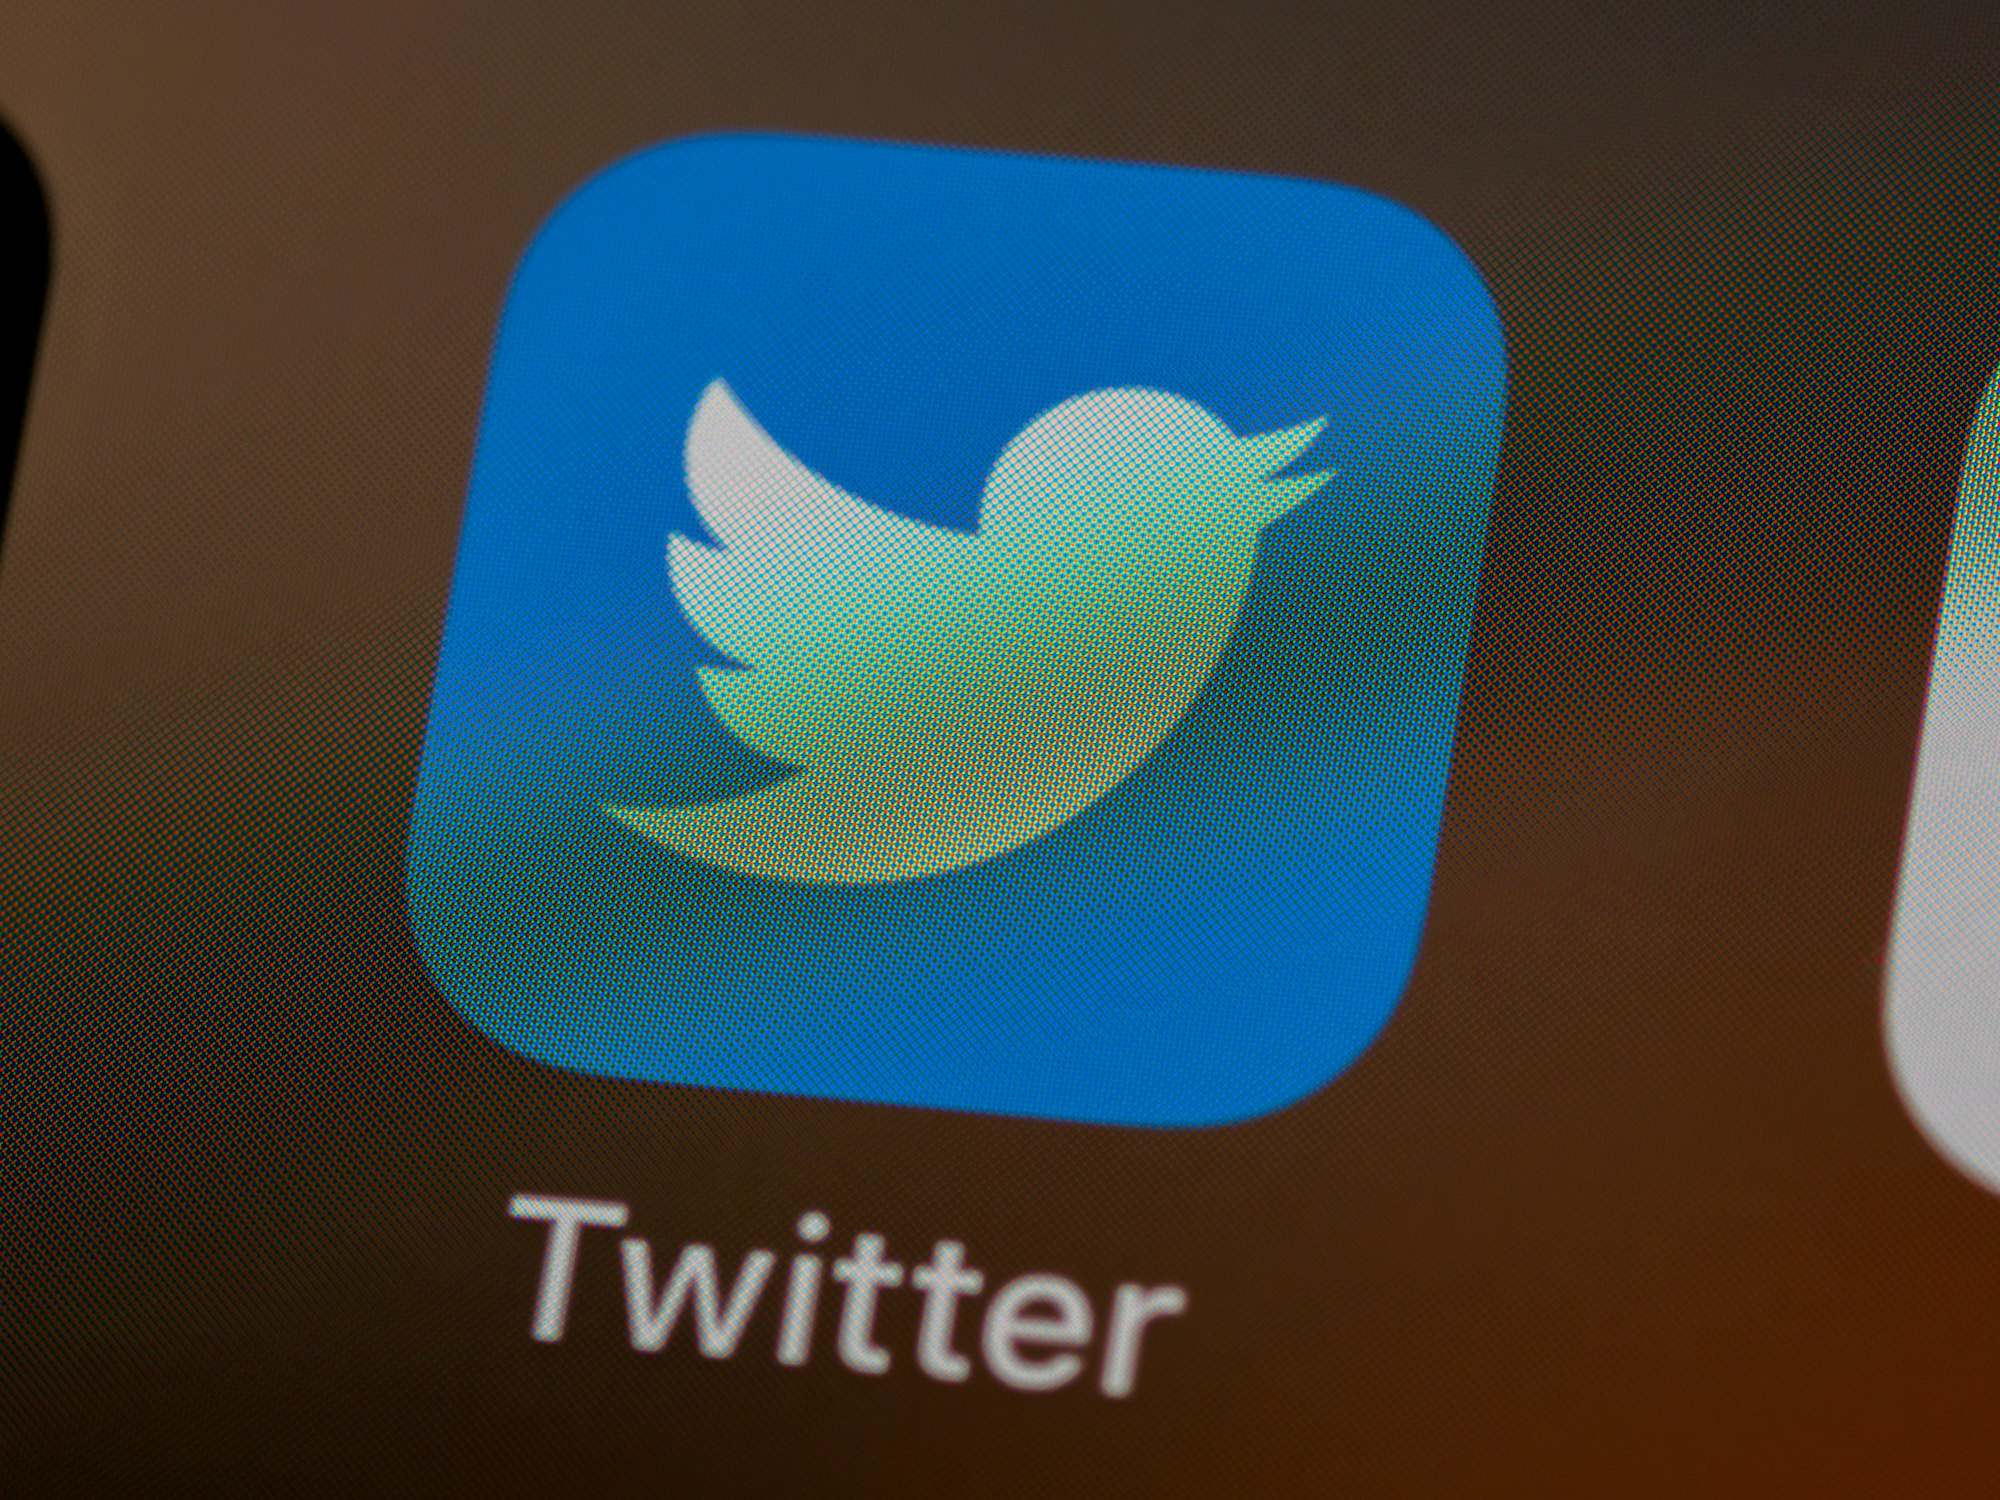 Apple was accused of hating free speech after it cut Twitter ad spending and allegedly threatened to ban it